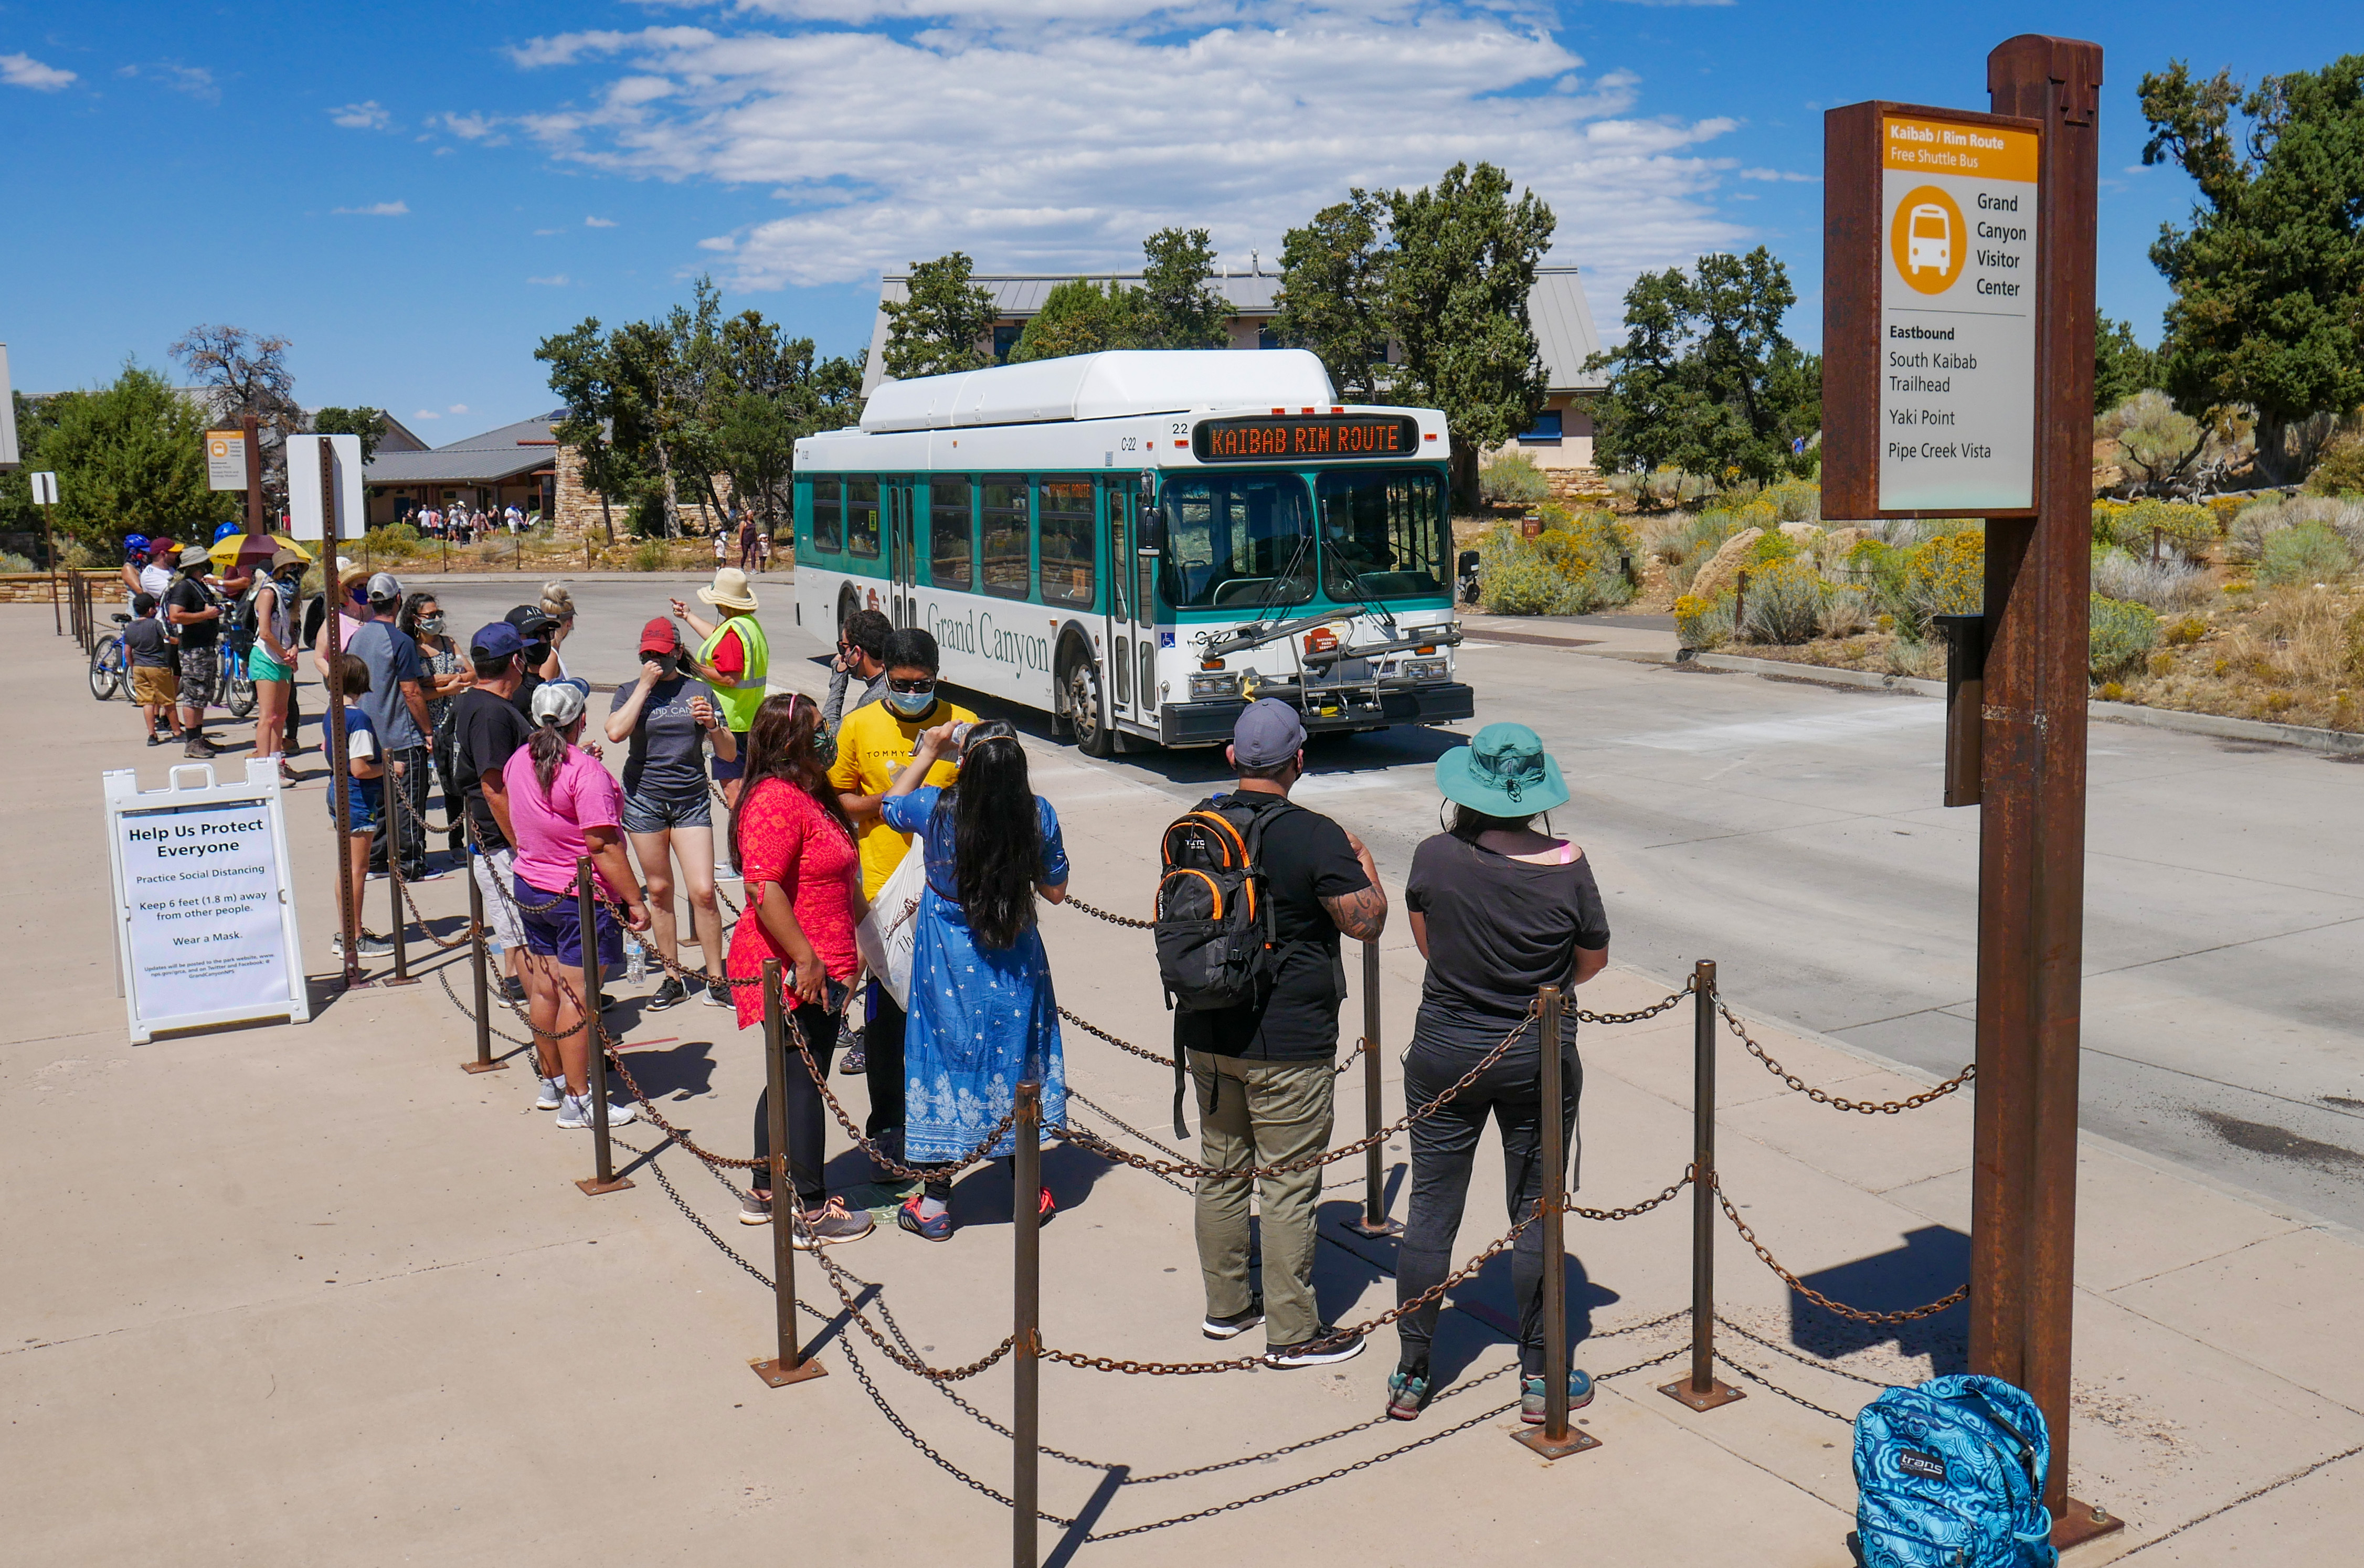 Visitors stand in line waiting for a shuttle bus at the Grand Canyon Visitor Center